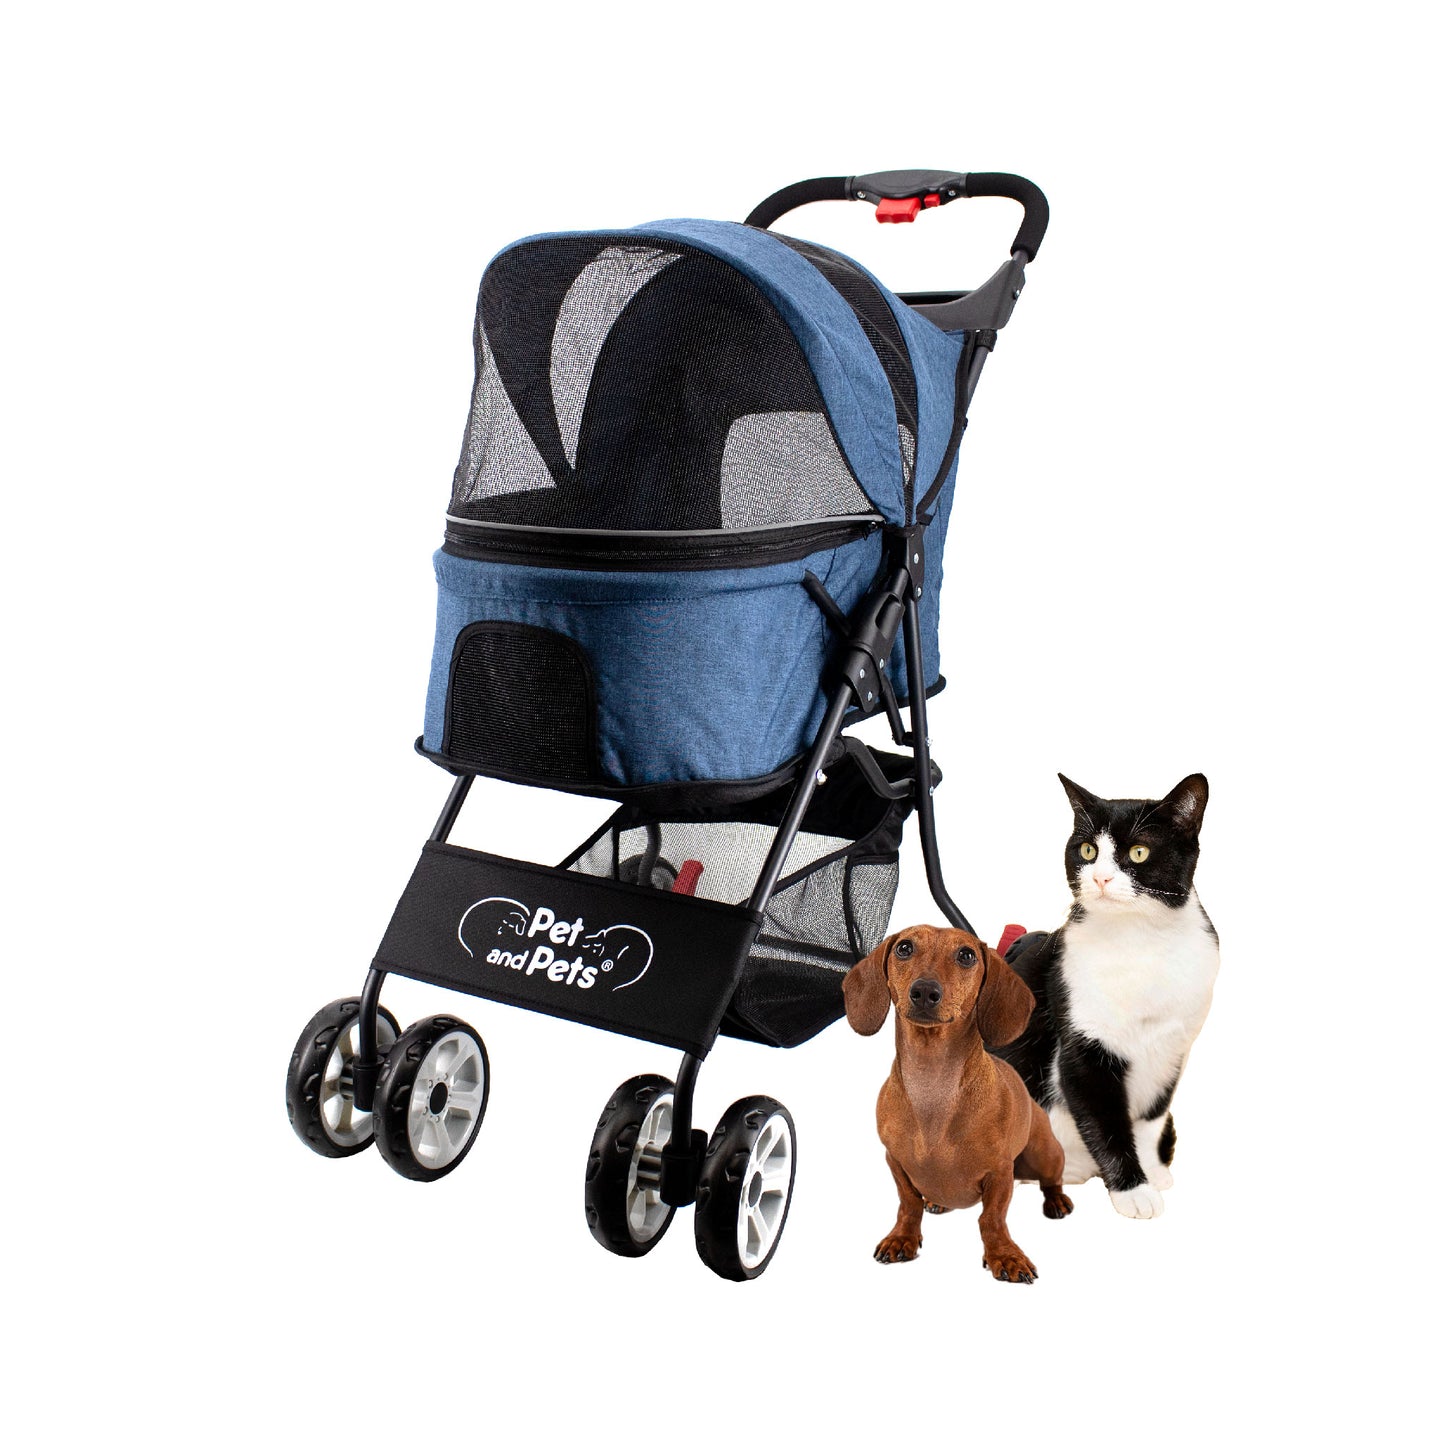 Catalina Pet Stroller: Durable, Lightweight, Compact Fold, Ventilation, Pee Pad Insert, Cup Holder, for Dogs/Cats/Pets up to 45LB